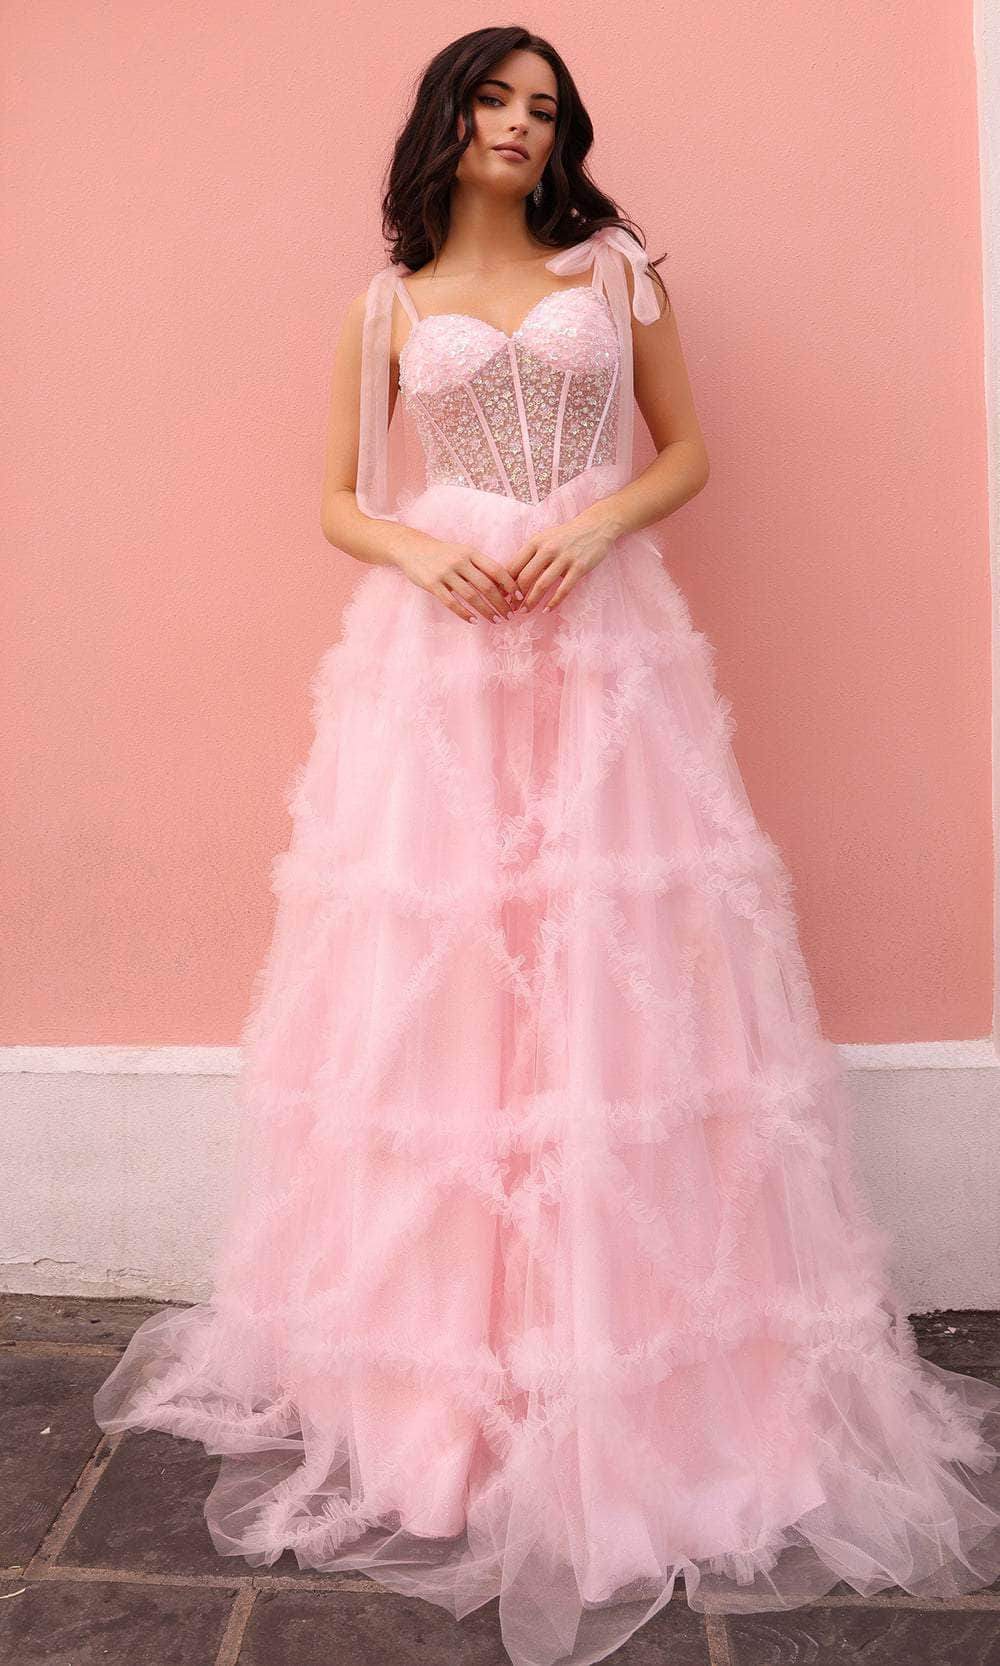 Image of Nox Anabel T1340 - Sweetheart Ruffled A-Line Prom Dress